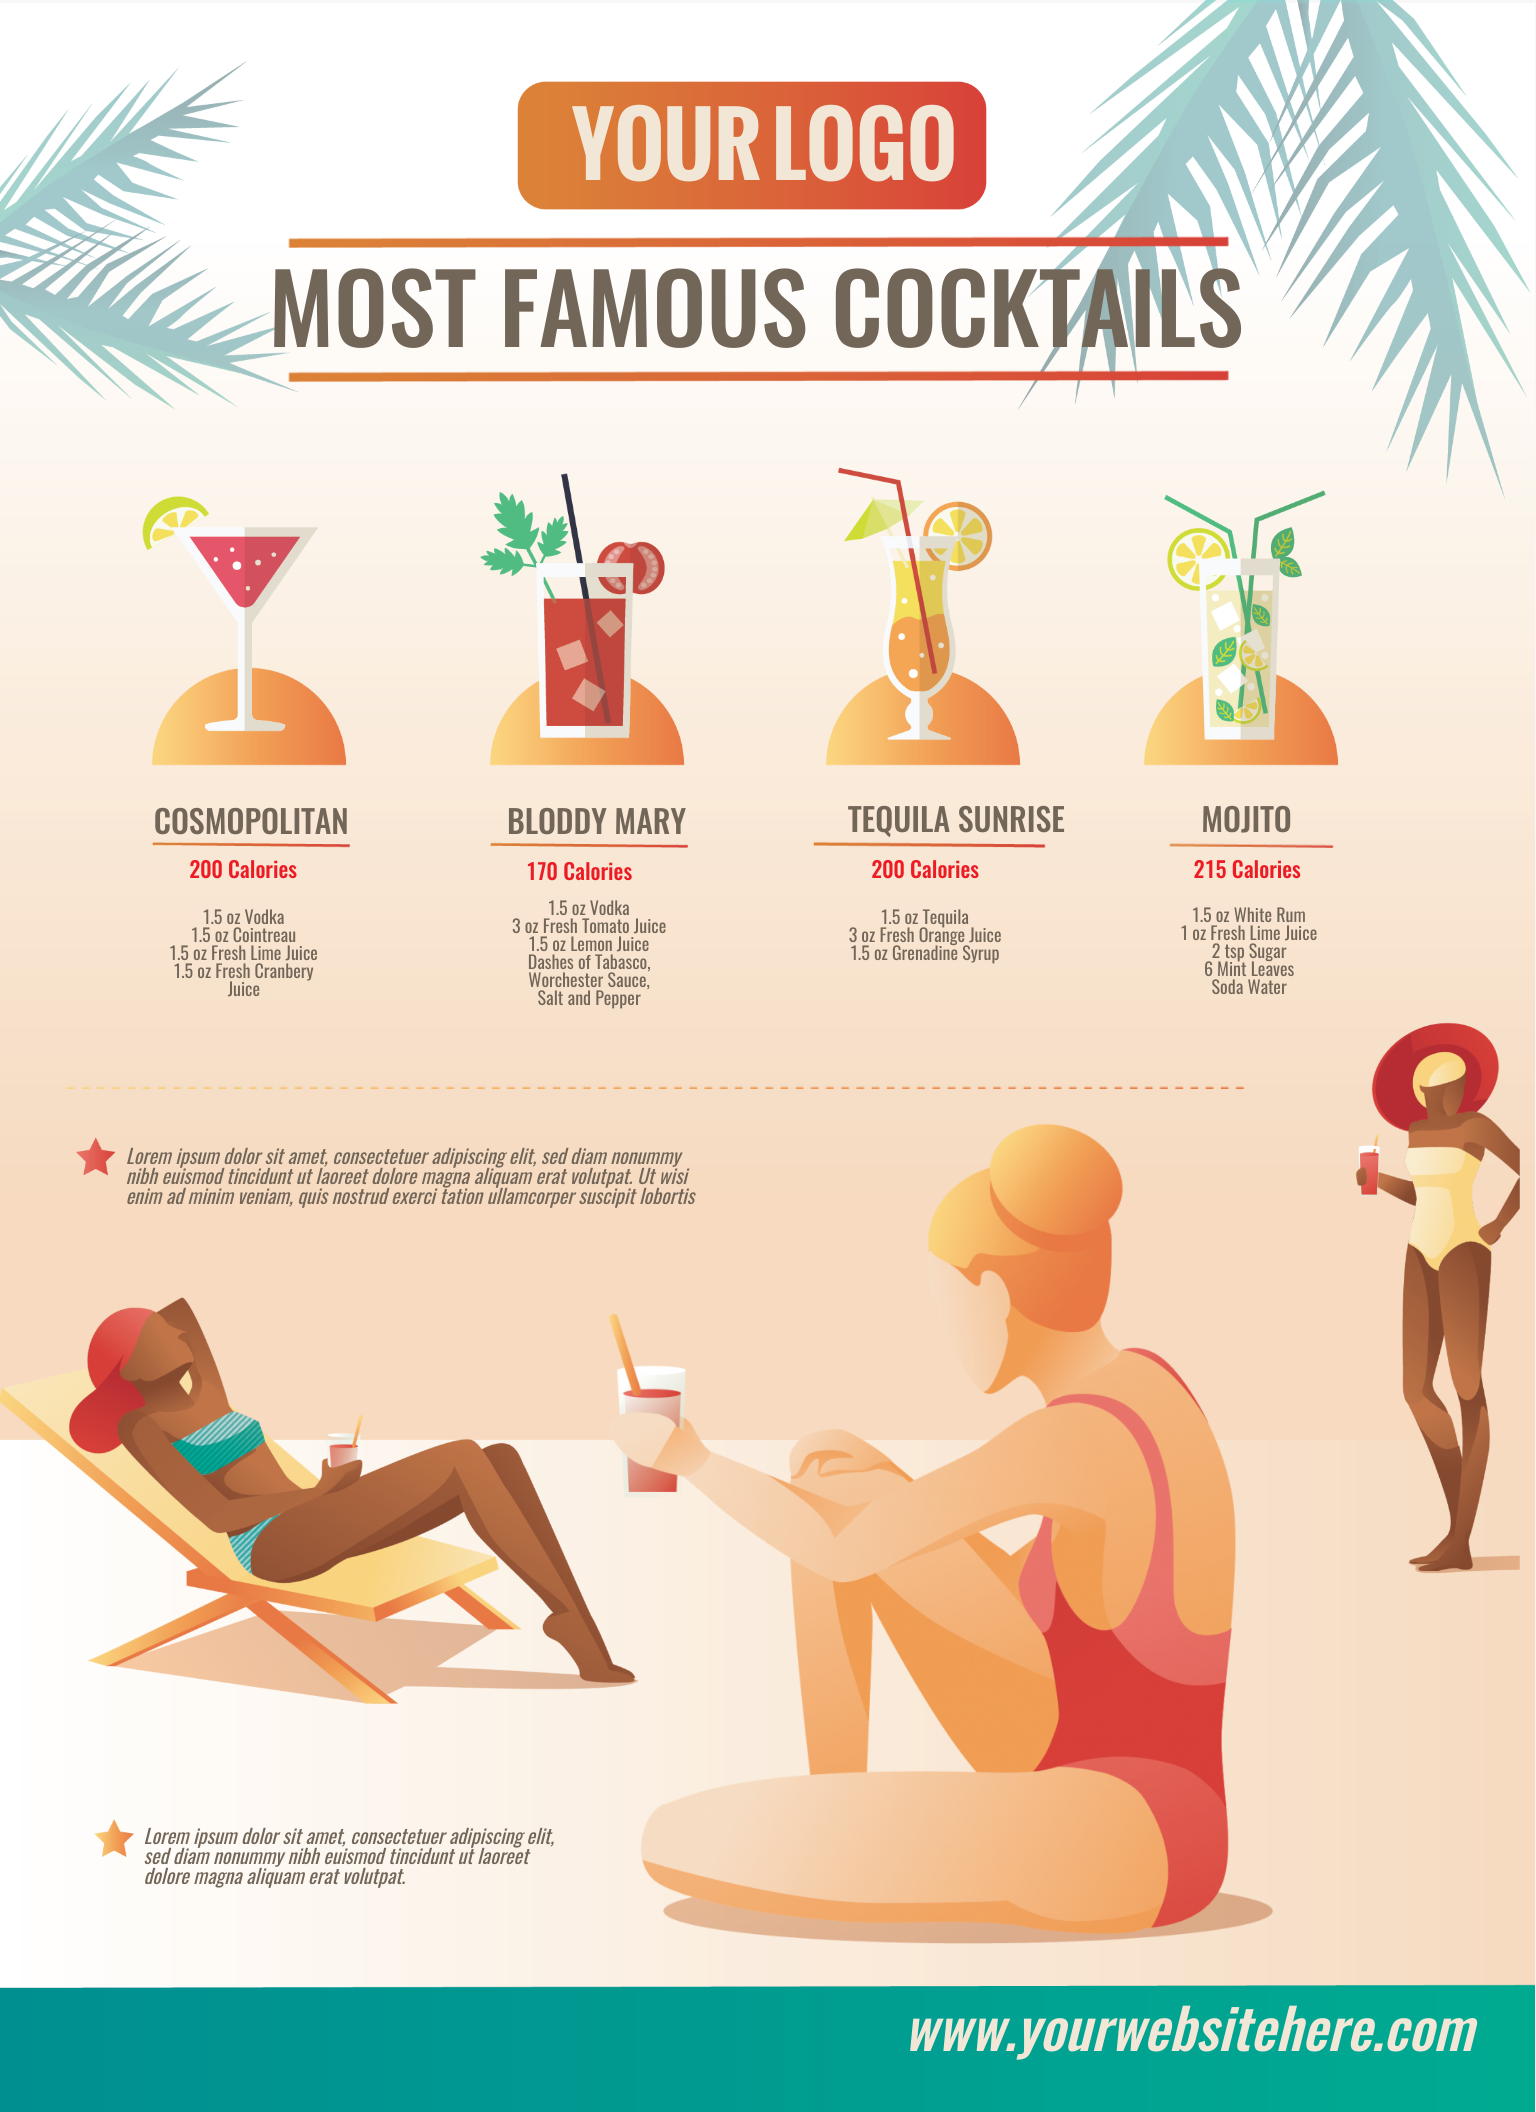 an infographic about famous cocktails